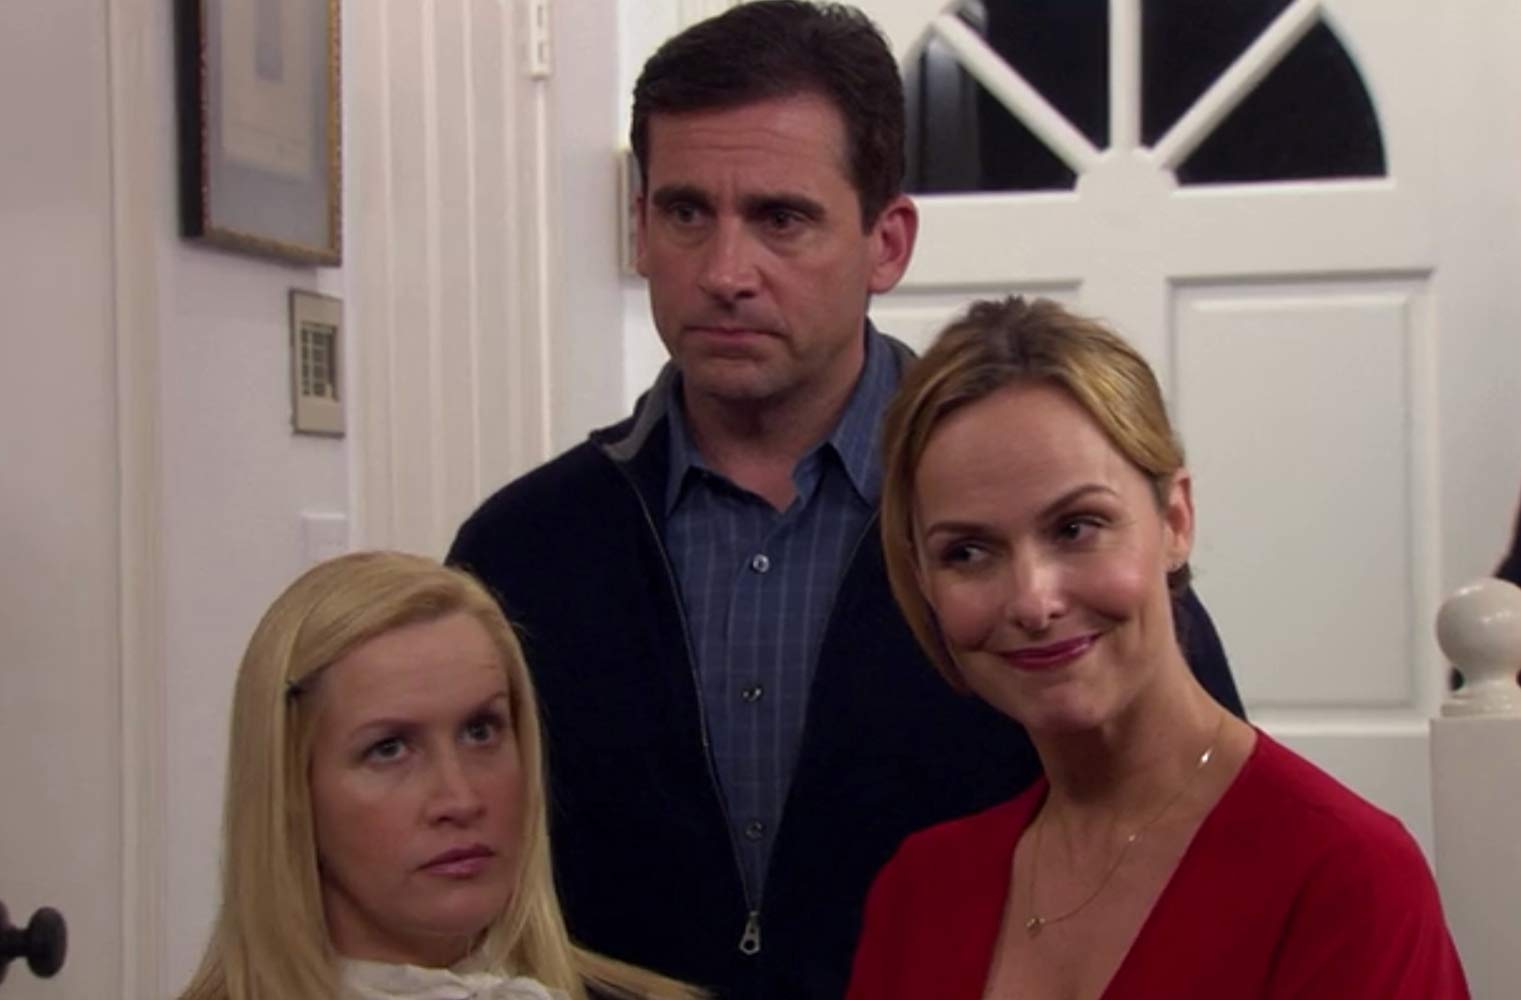 Angela, Michael, and Jan in ‘The Office’